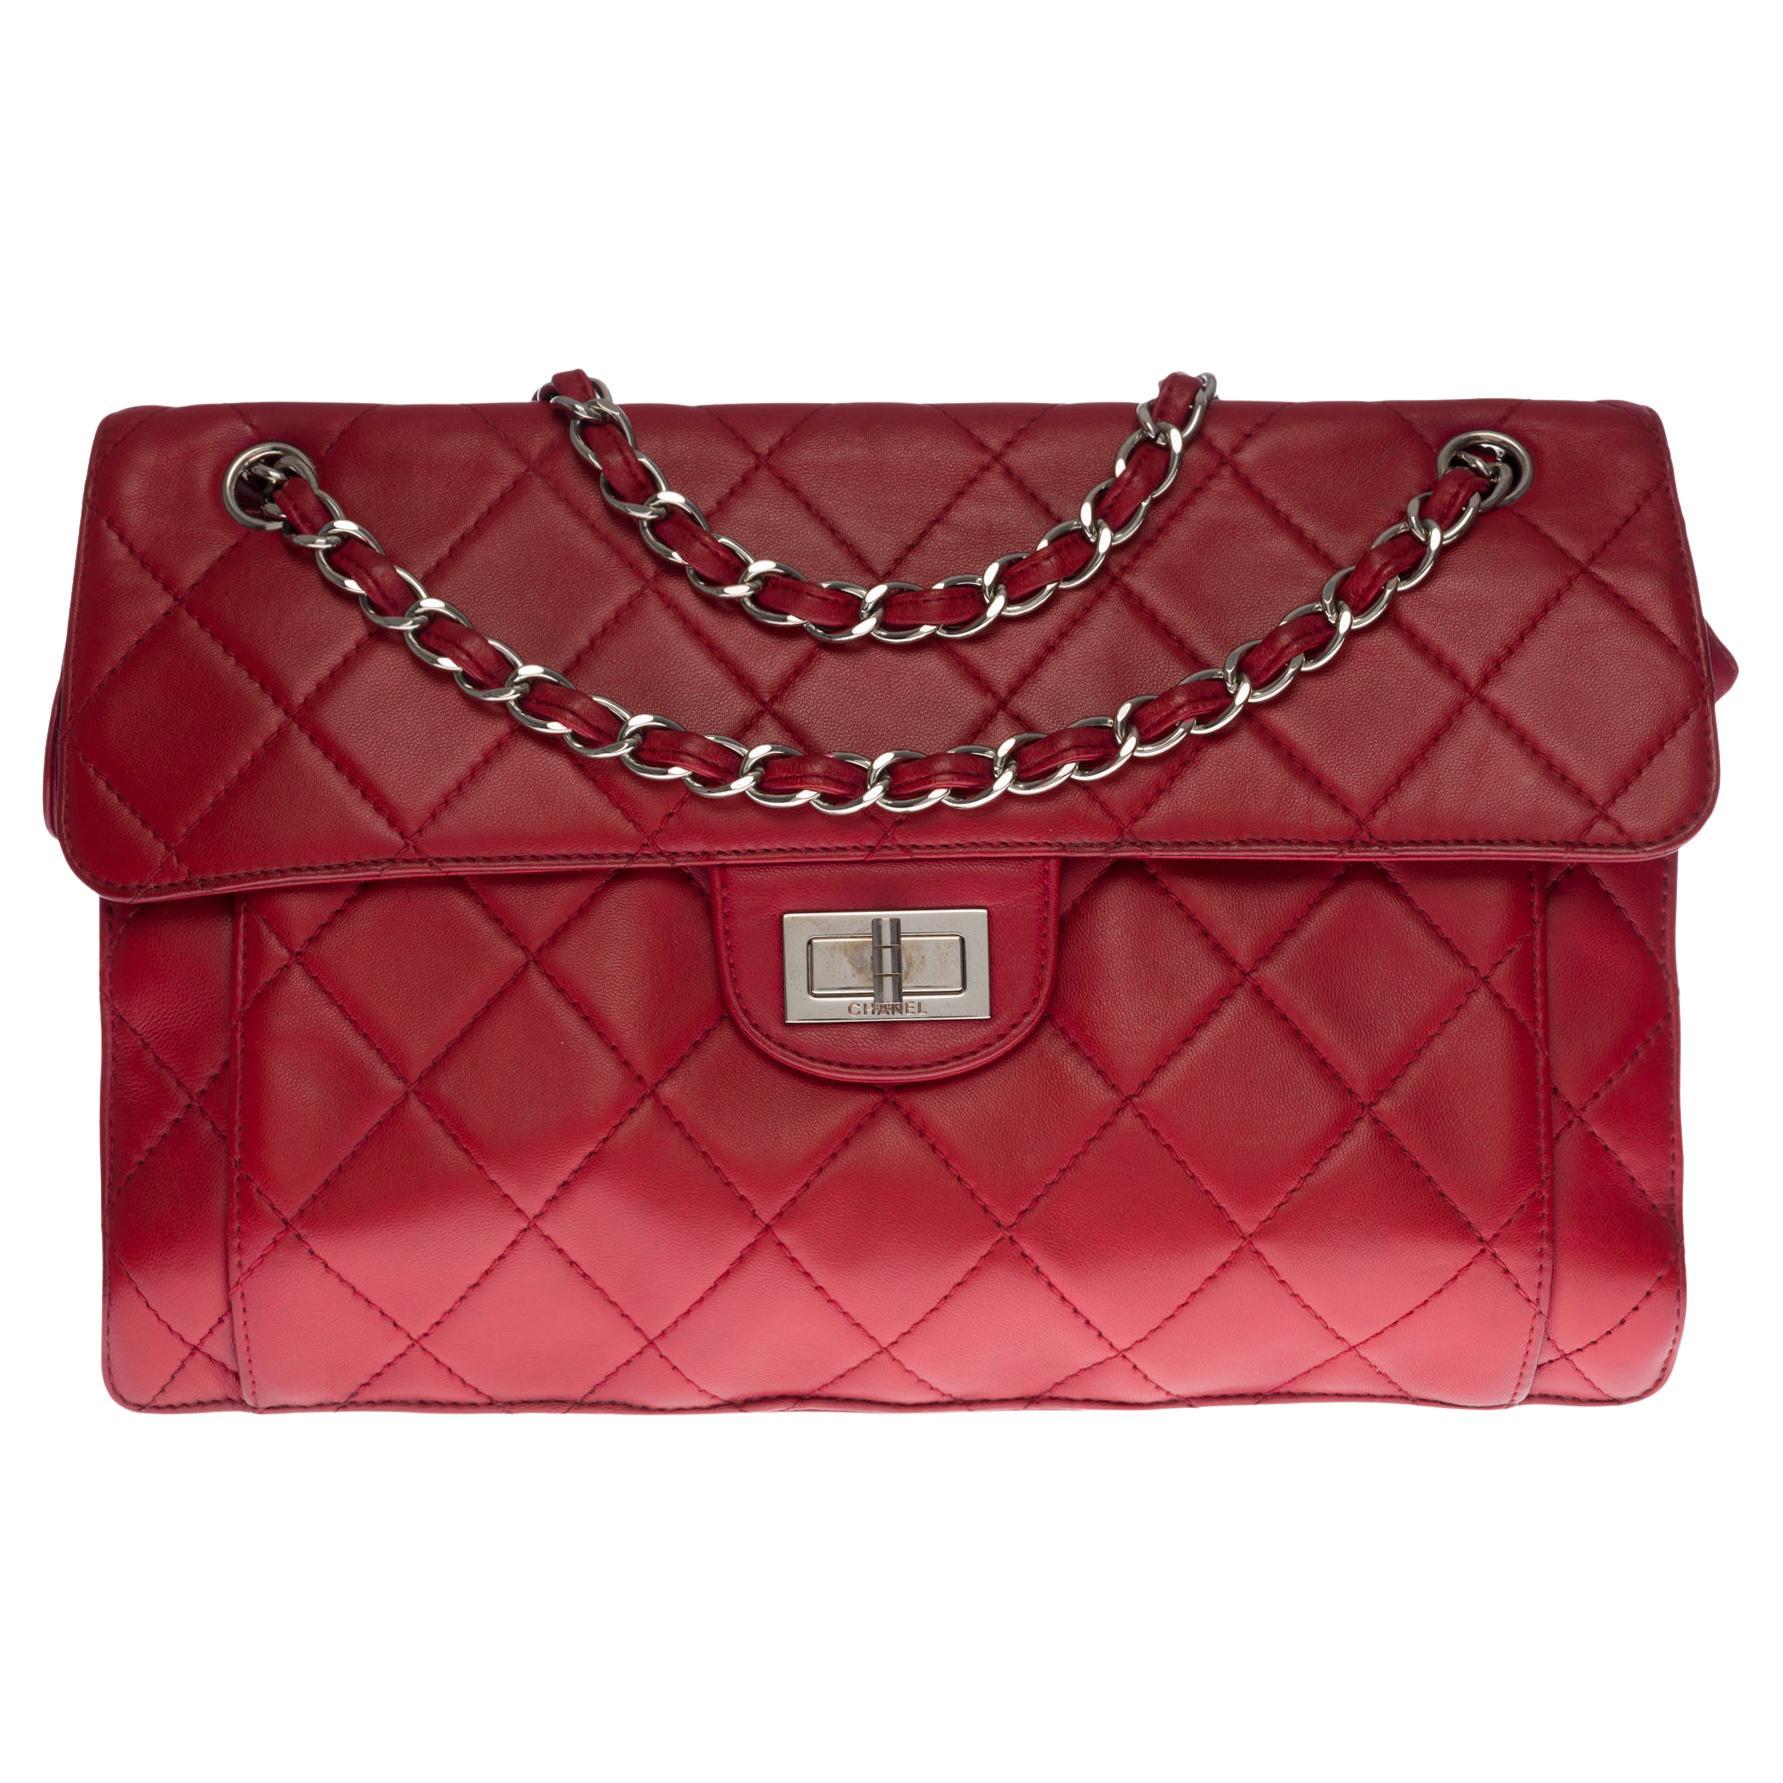 Chanel Classic 2.55 Maxi shoulder bag in red quilted leather, SHW